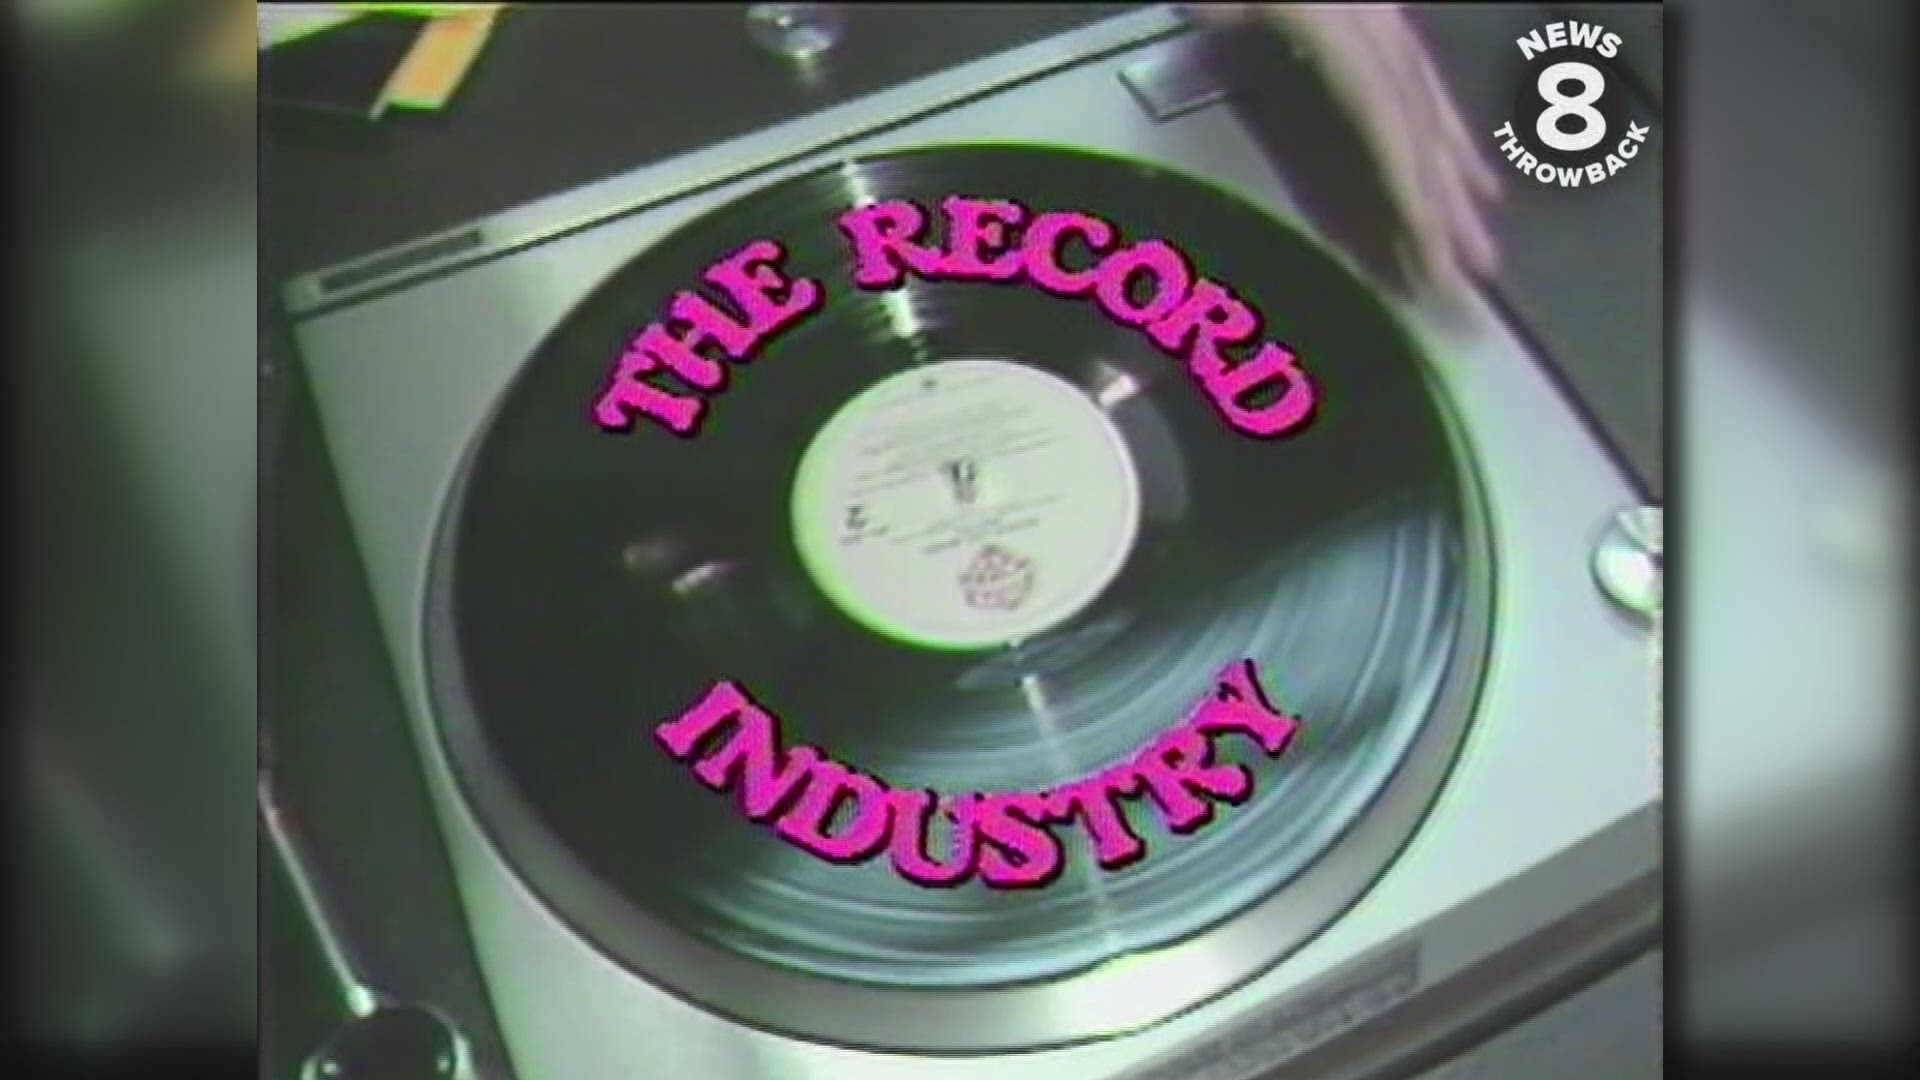 News 8 series on the record business in 1981